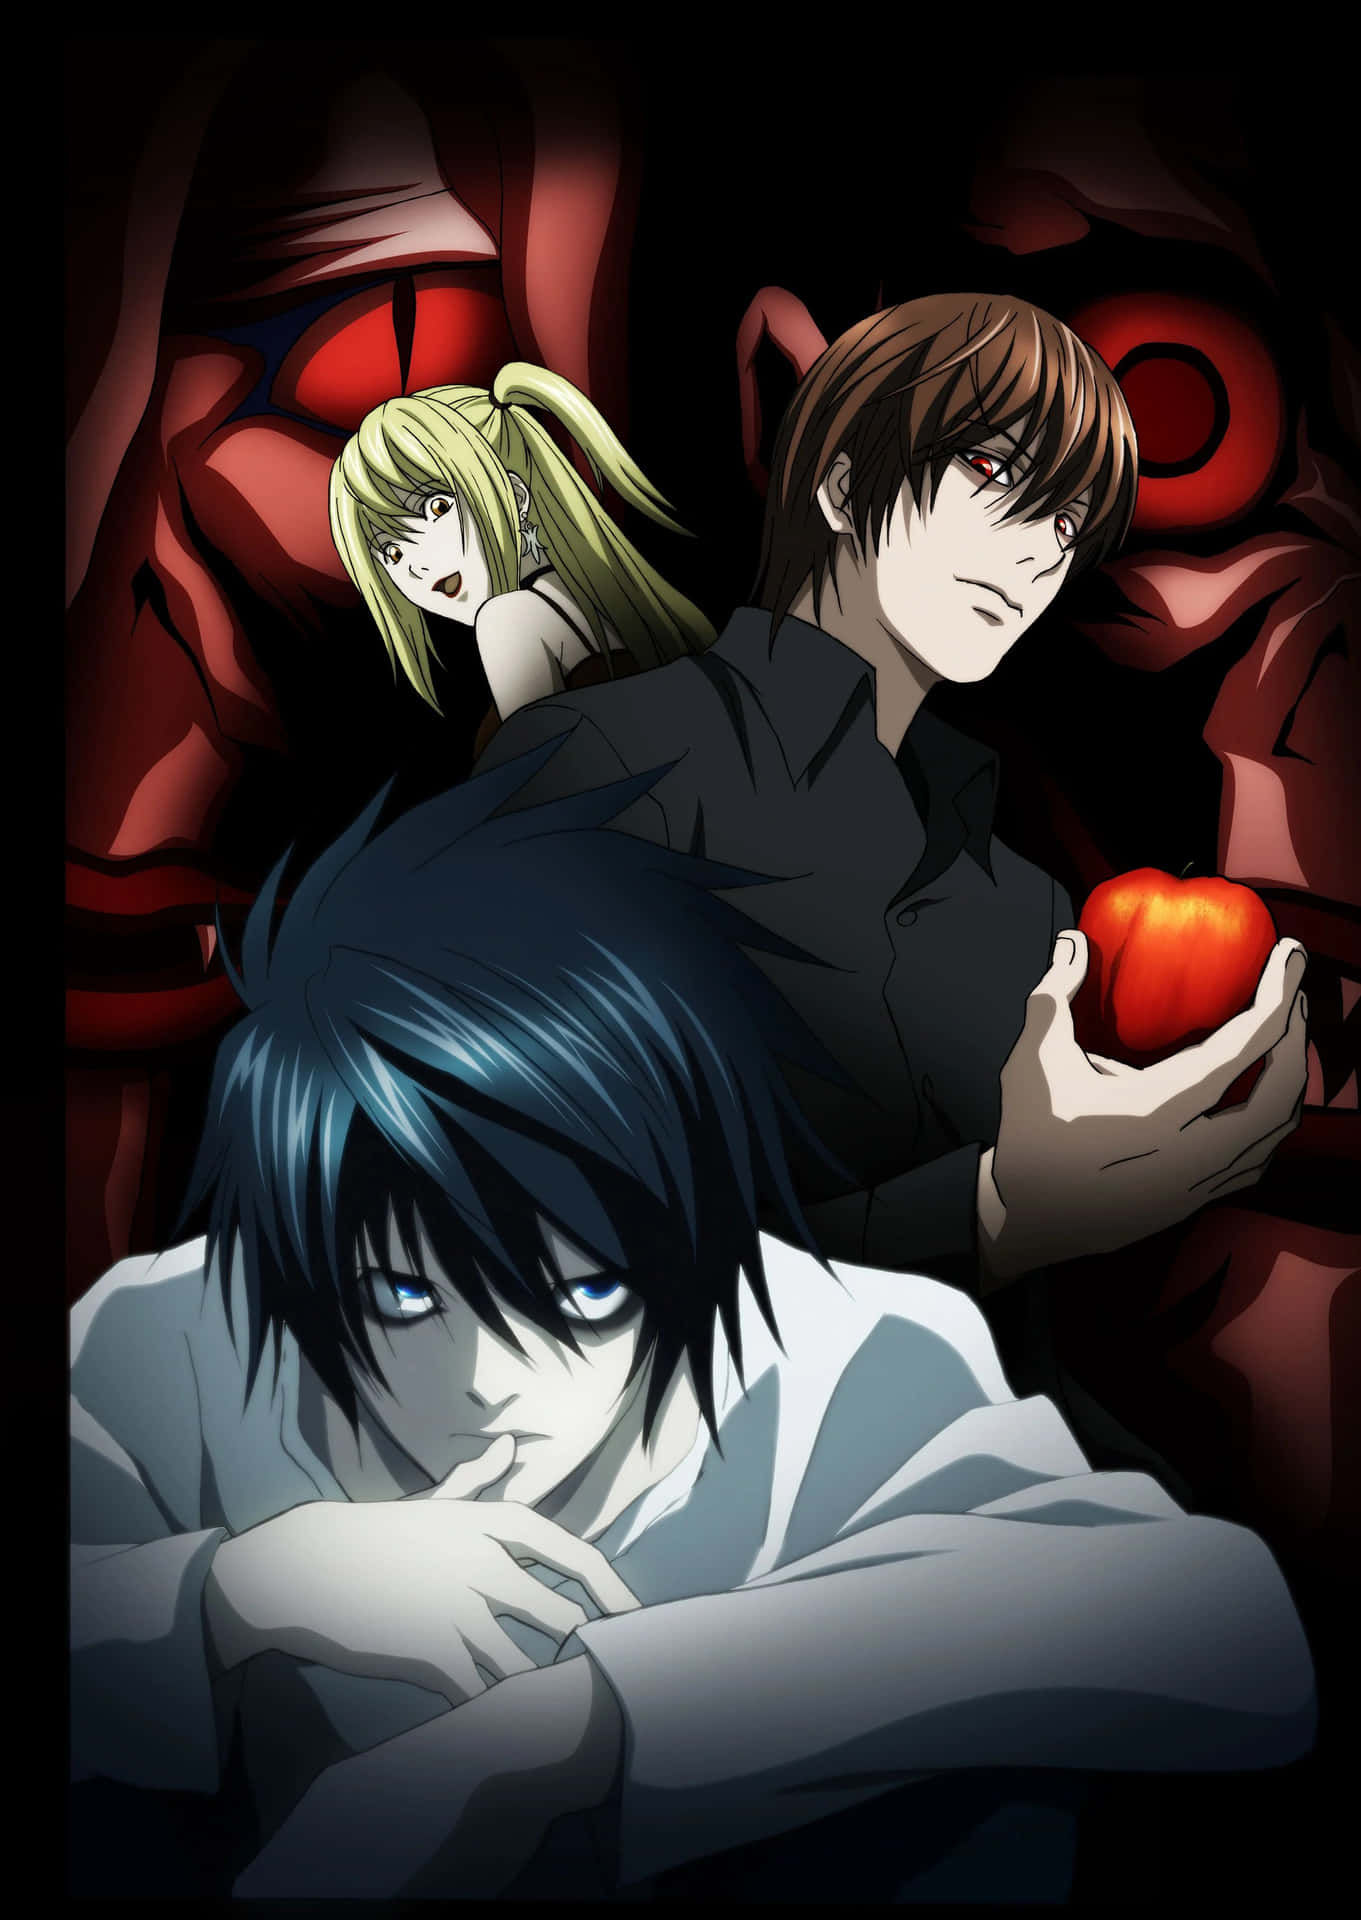 "Rewrite the fate of the world with Death Note!"